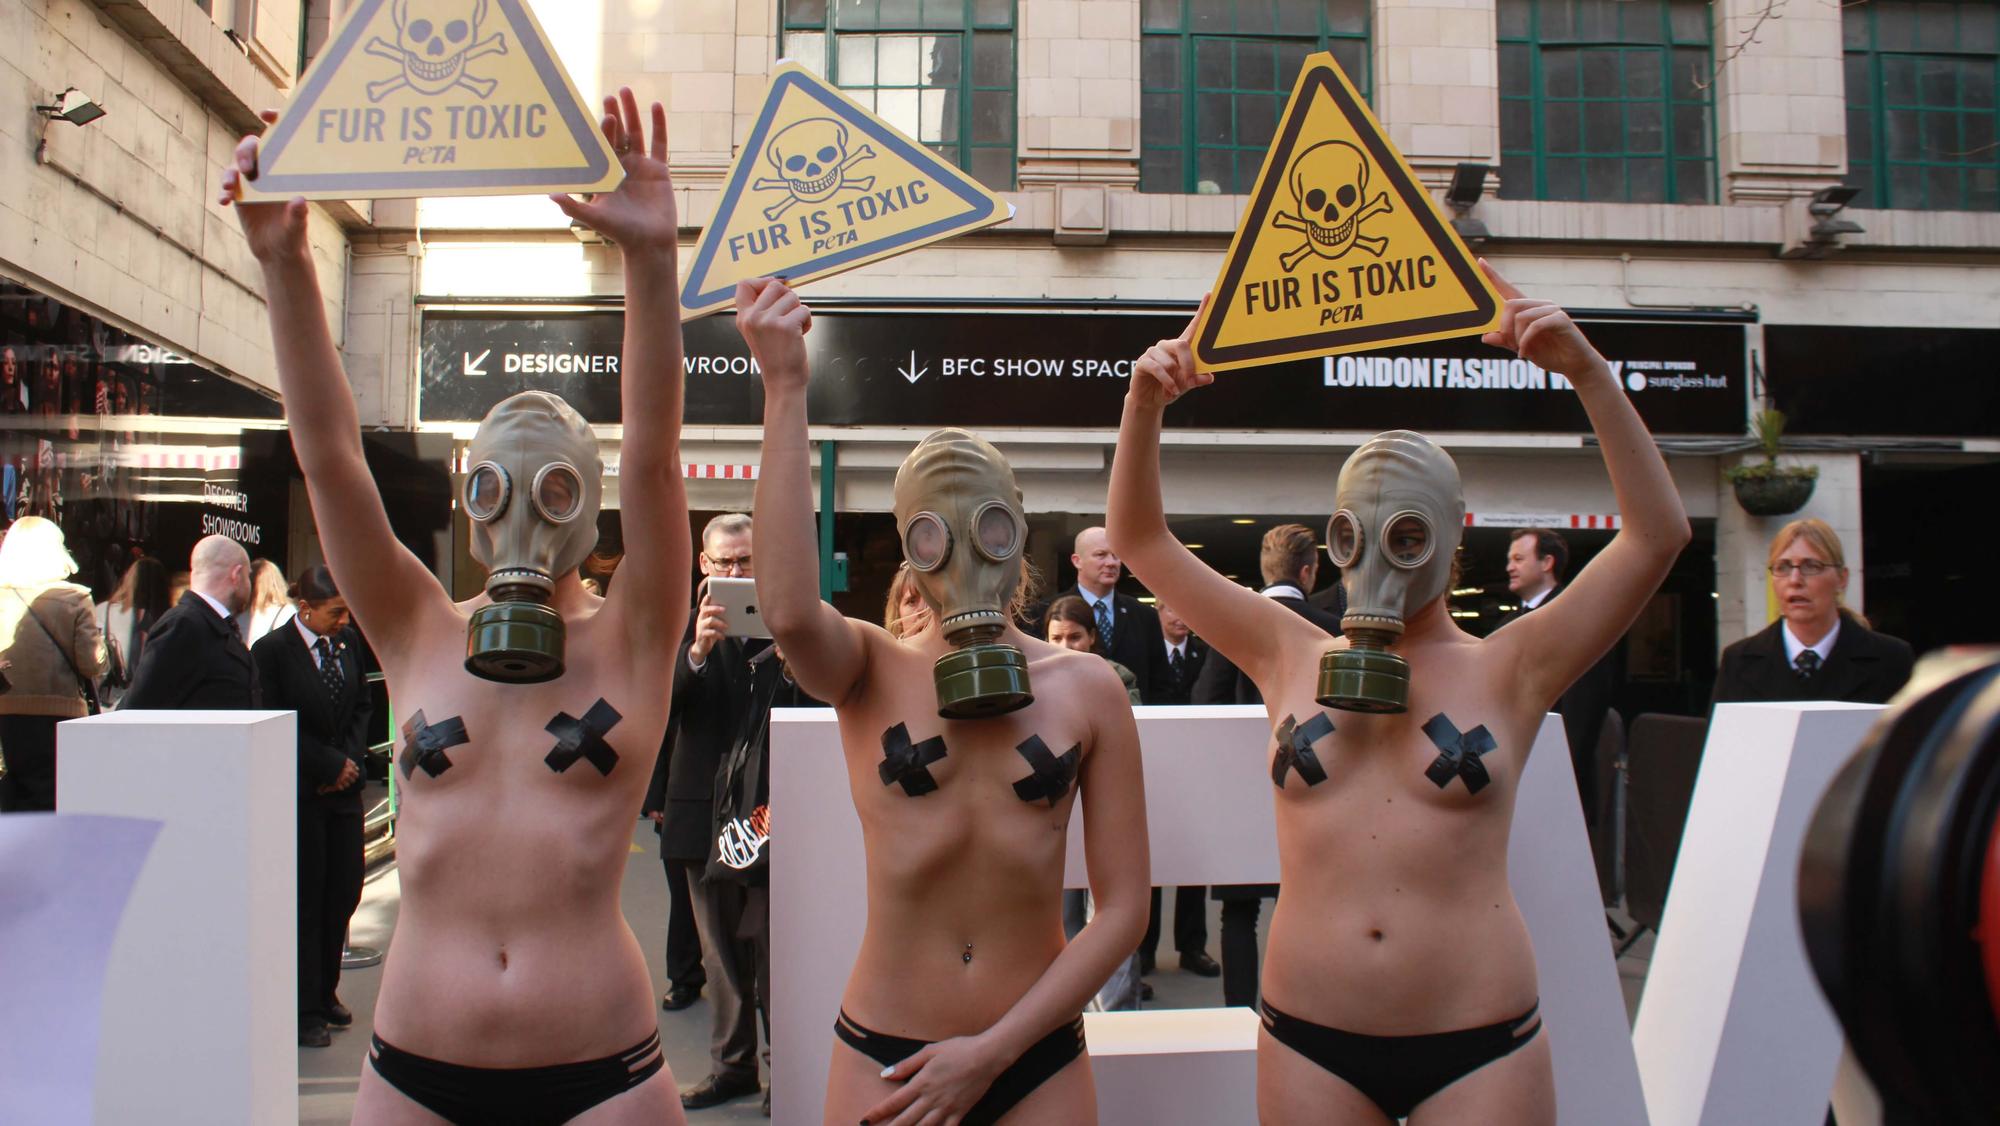 Naked PETA Activists In Gas Masks Set Off LFW Day One With Anti-Fur Protest